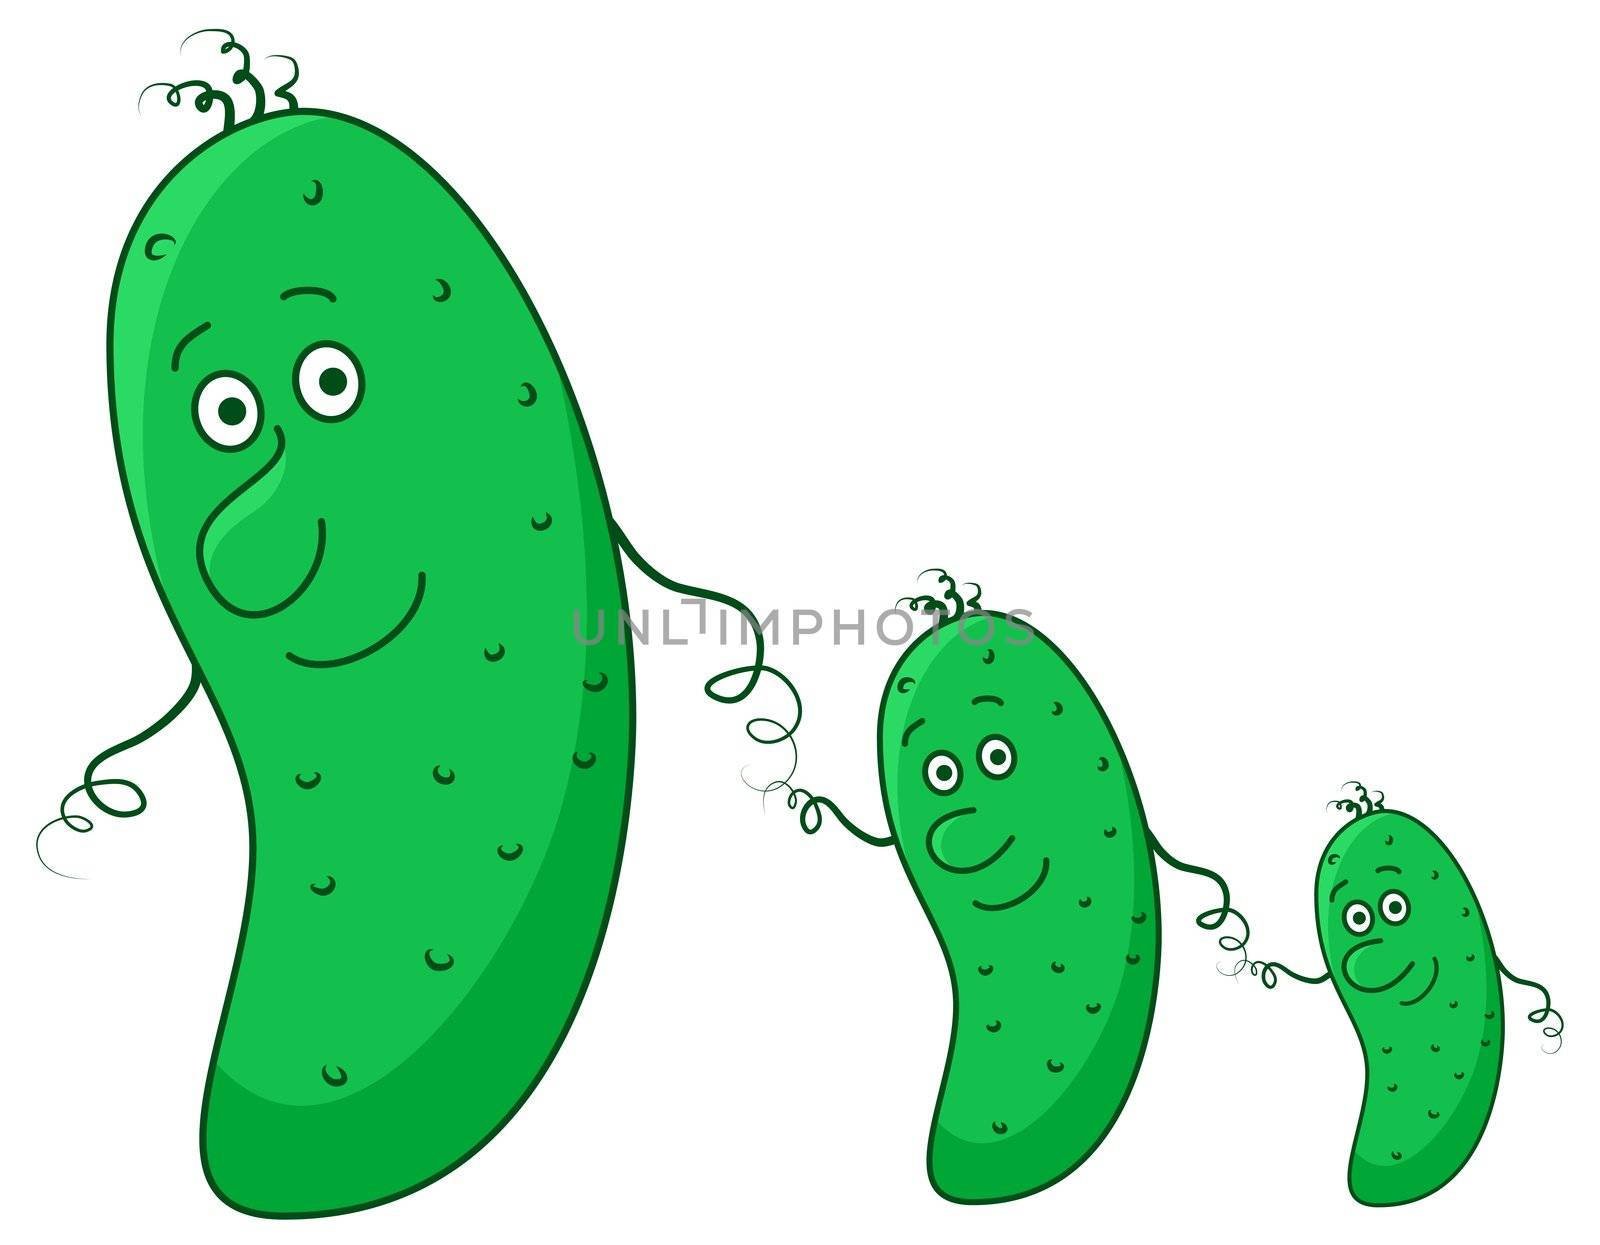 Cucumbers, family by alexcoolok